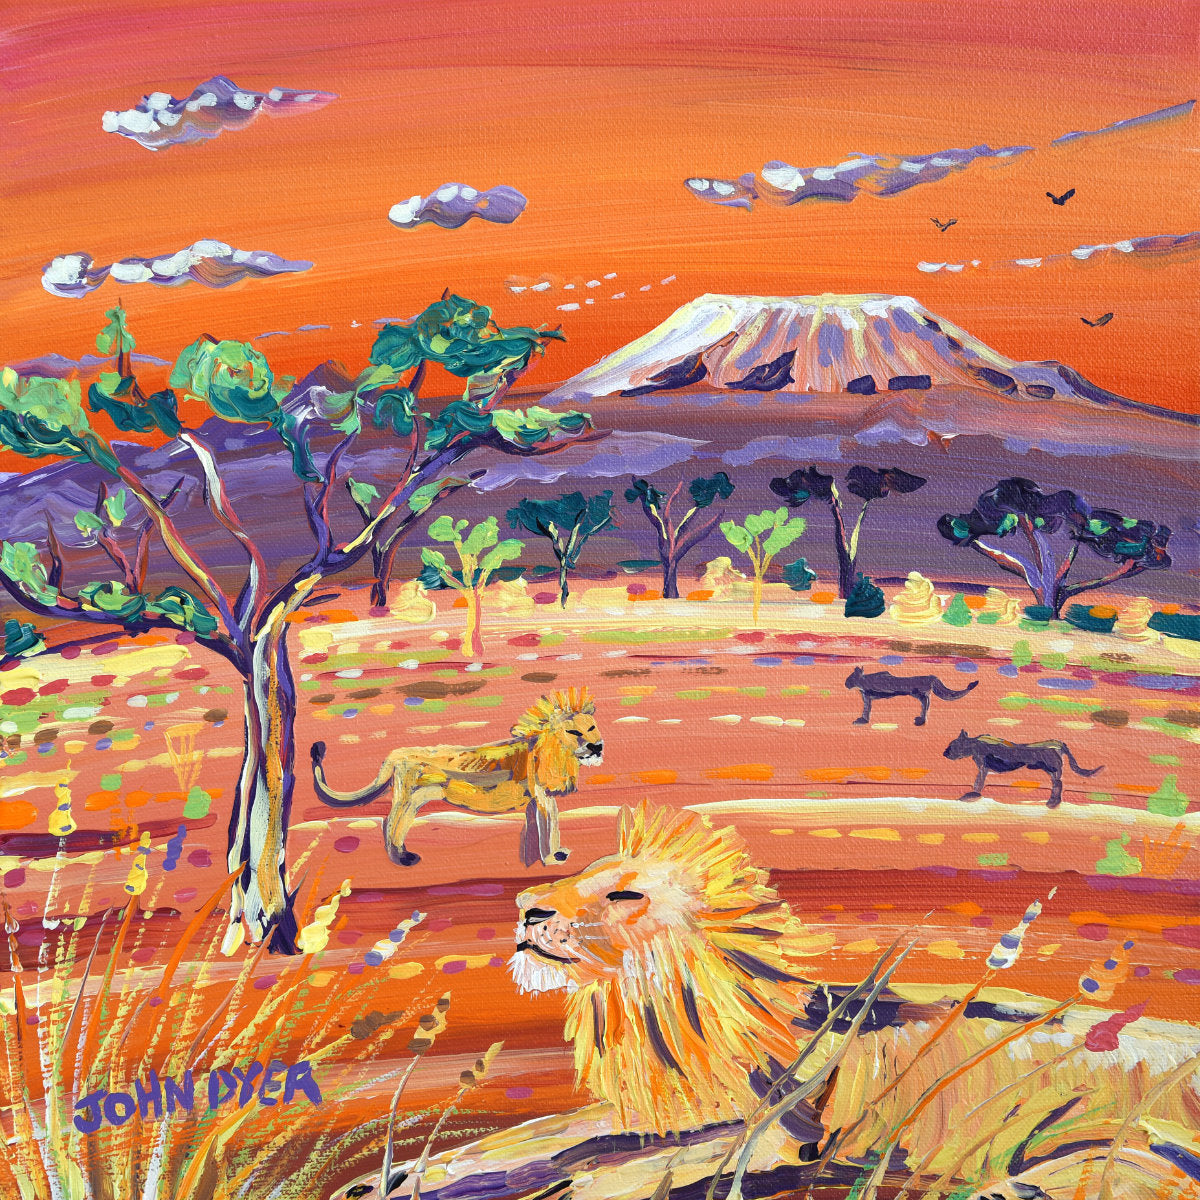 &#39;Sunset Lions, Kenya&#39;, 12x12 inches acrylic on canvas. Paintings of Africa by British Artist John Dyer.